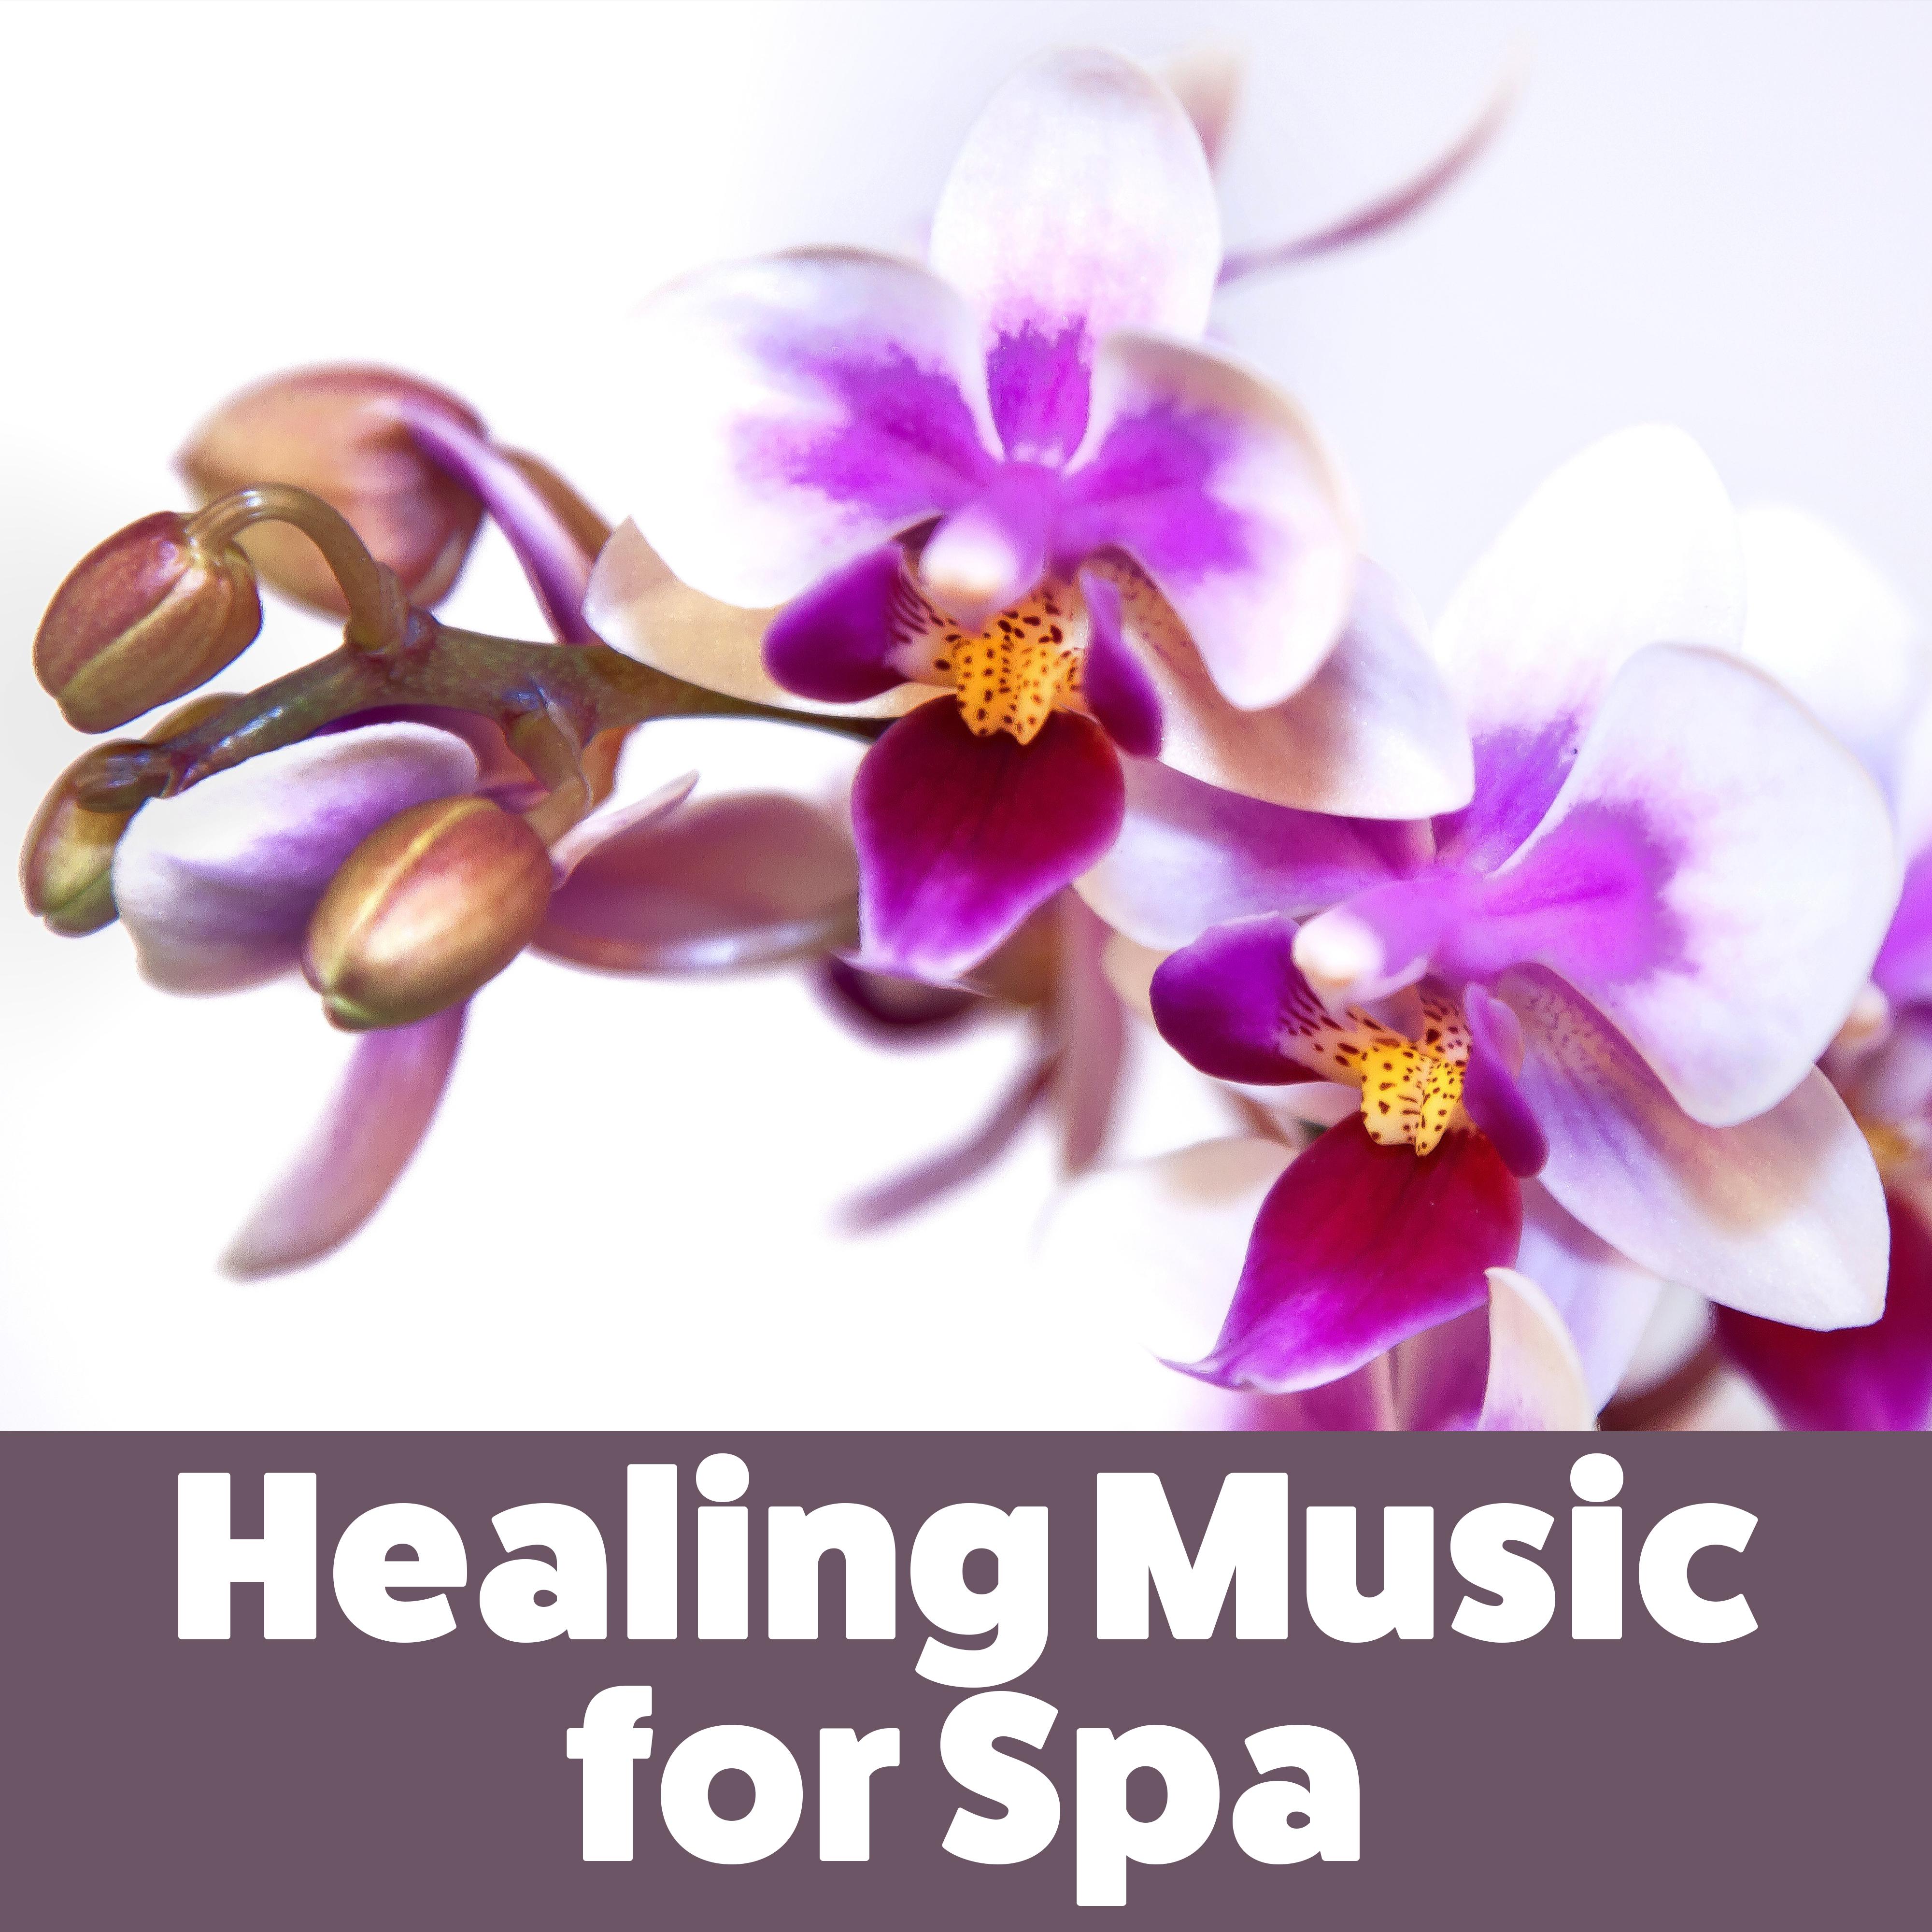 Healing Music for Spa  Nature Sounds, Deep Relief, Sea Waves, Spa Music, Pure Massage, Peaceful Mind